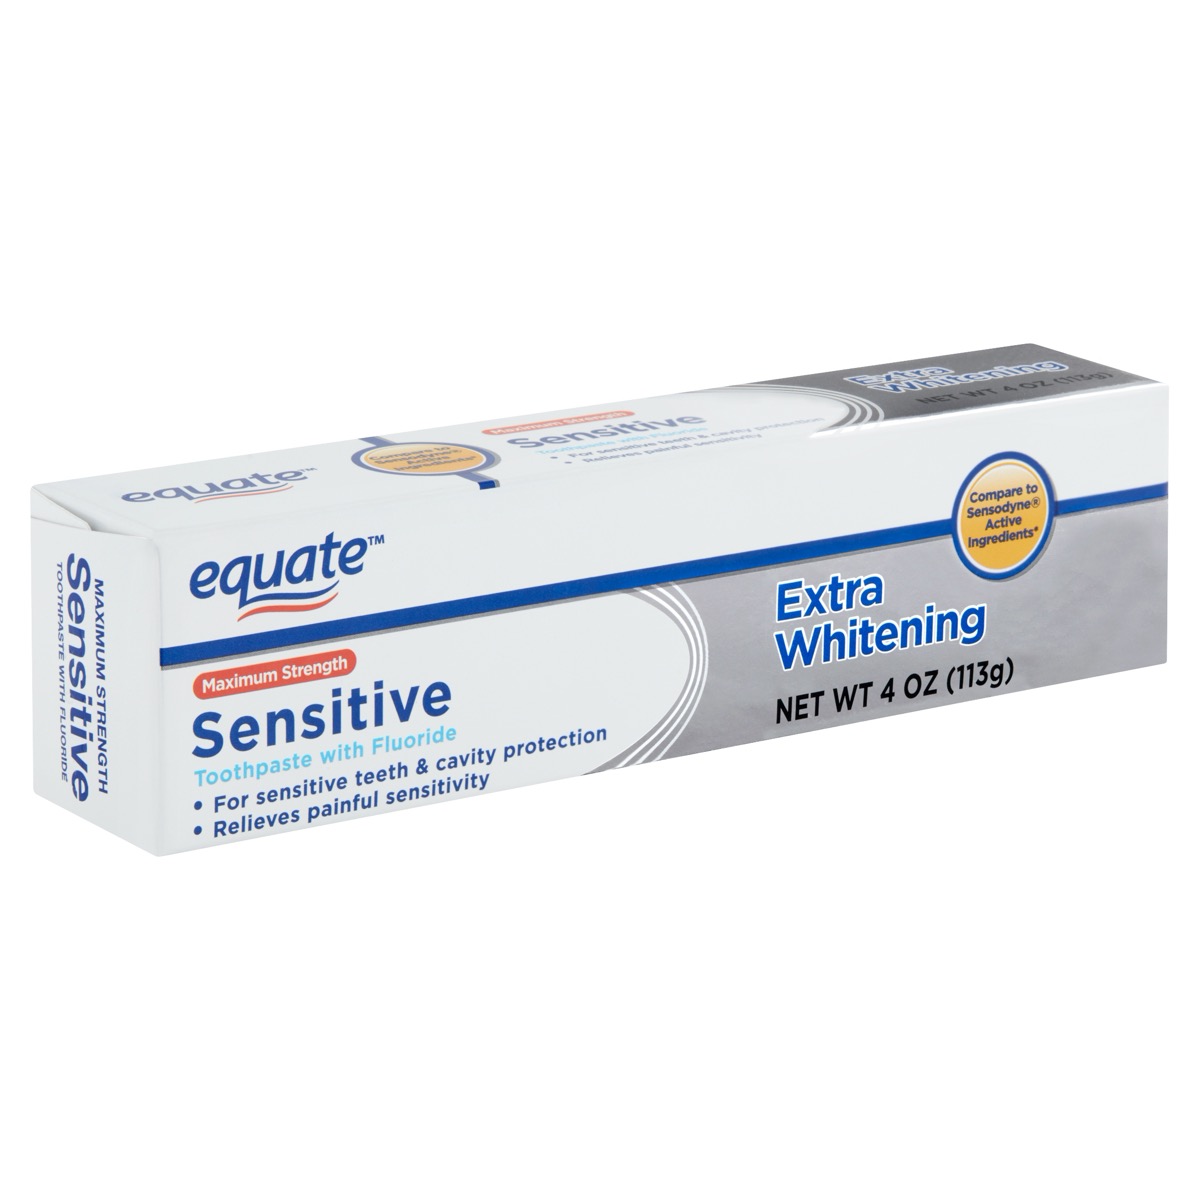 Equate Sensitive Toothpaste